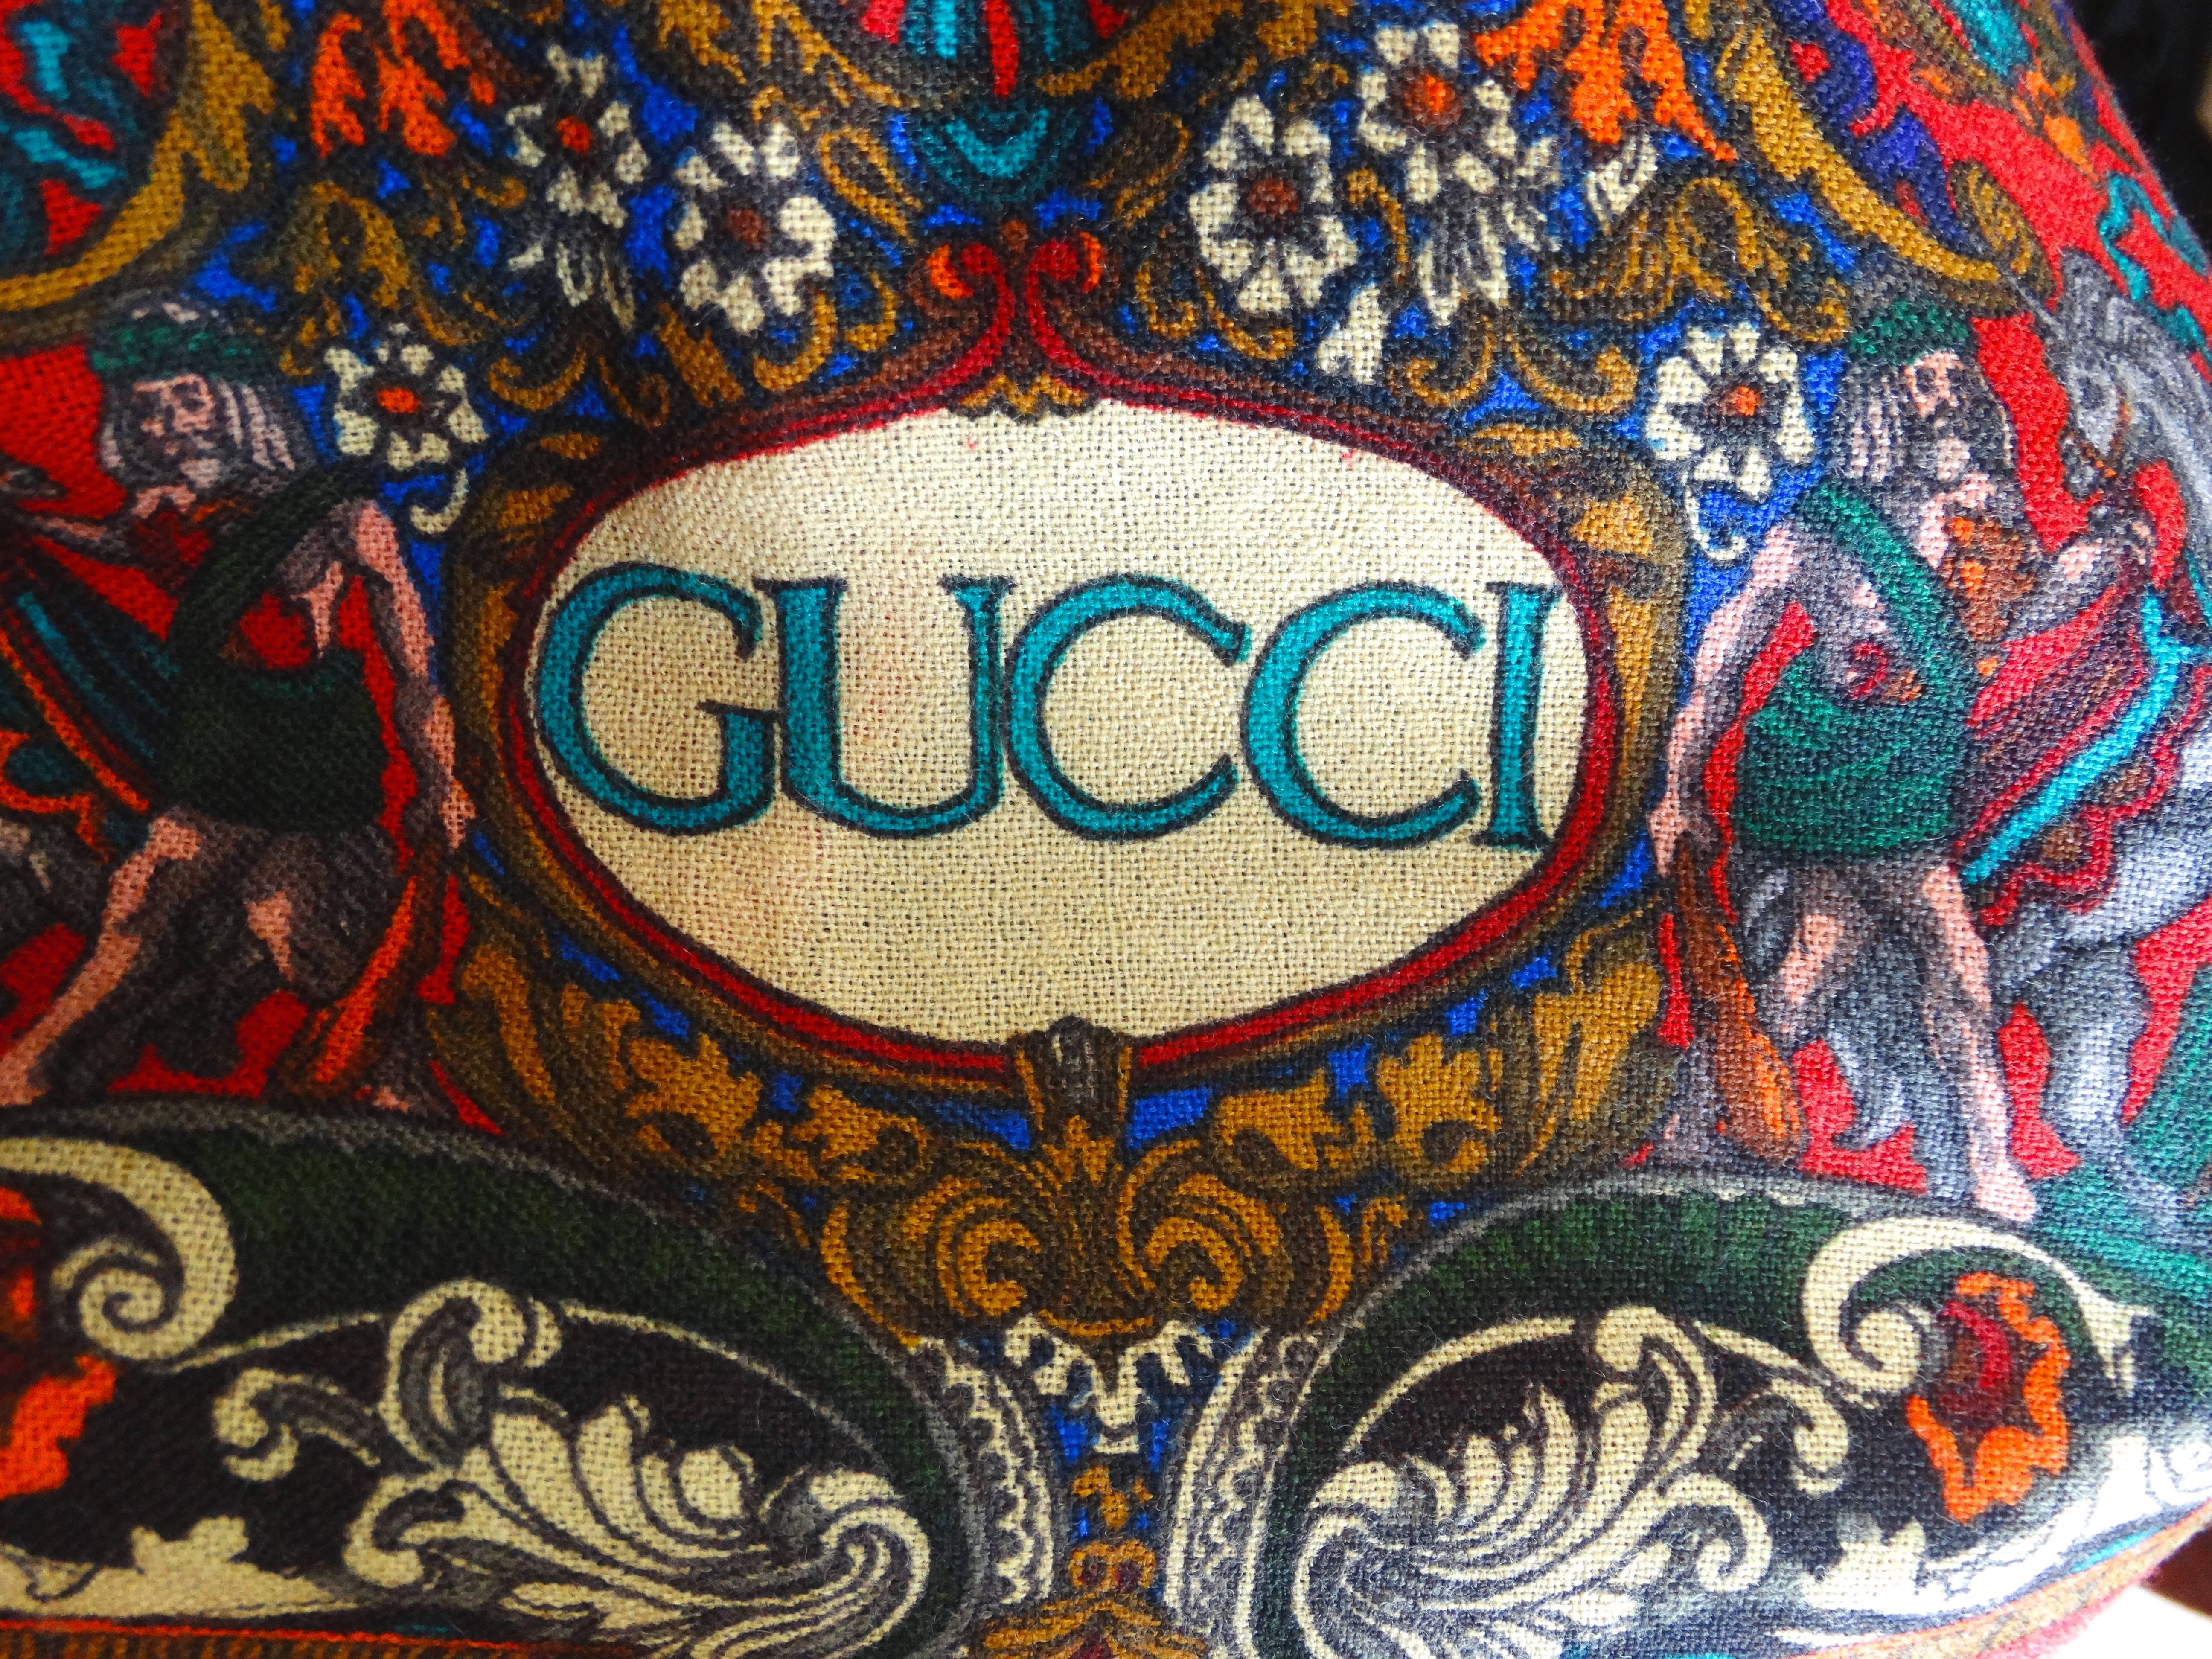 A wool shawl with a screen print style design, arabian horses with men of royalty in rich colors of red, cream, grey, turquoise to name a few. The GUCCI trademark symbol is the the original 80's logo, which Gucci has brought back and is one of the